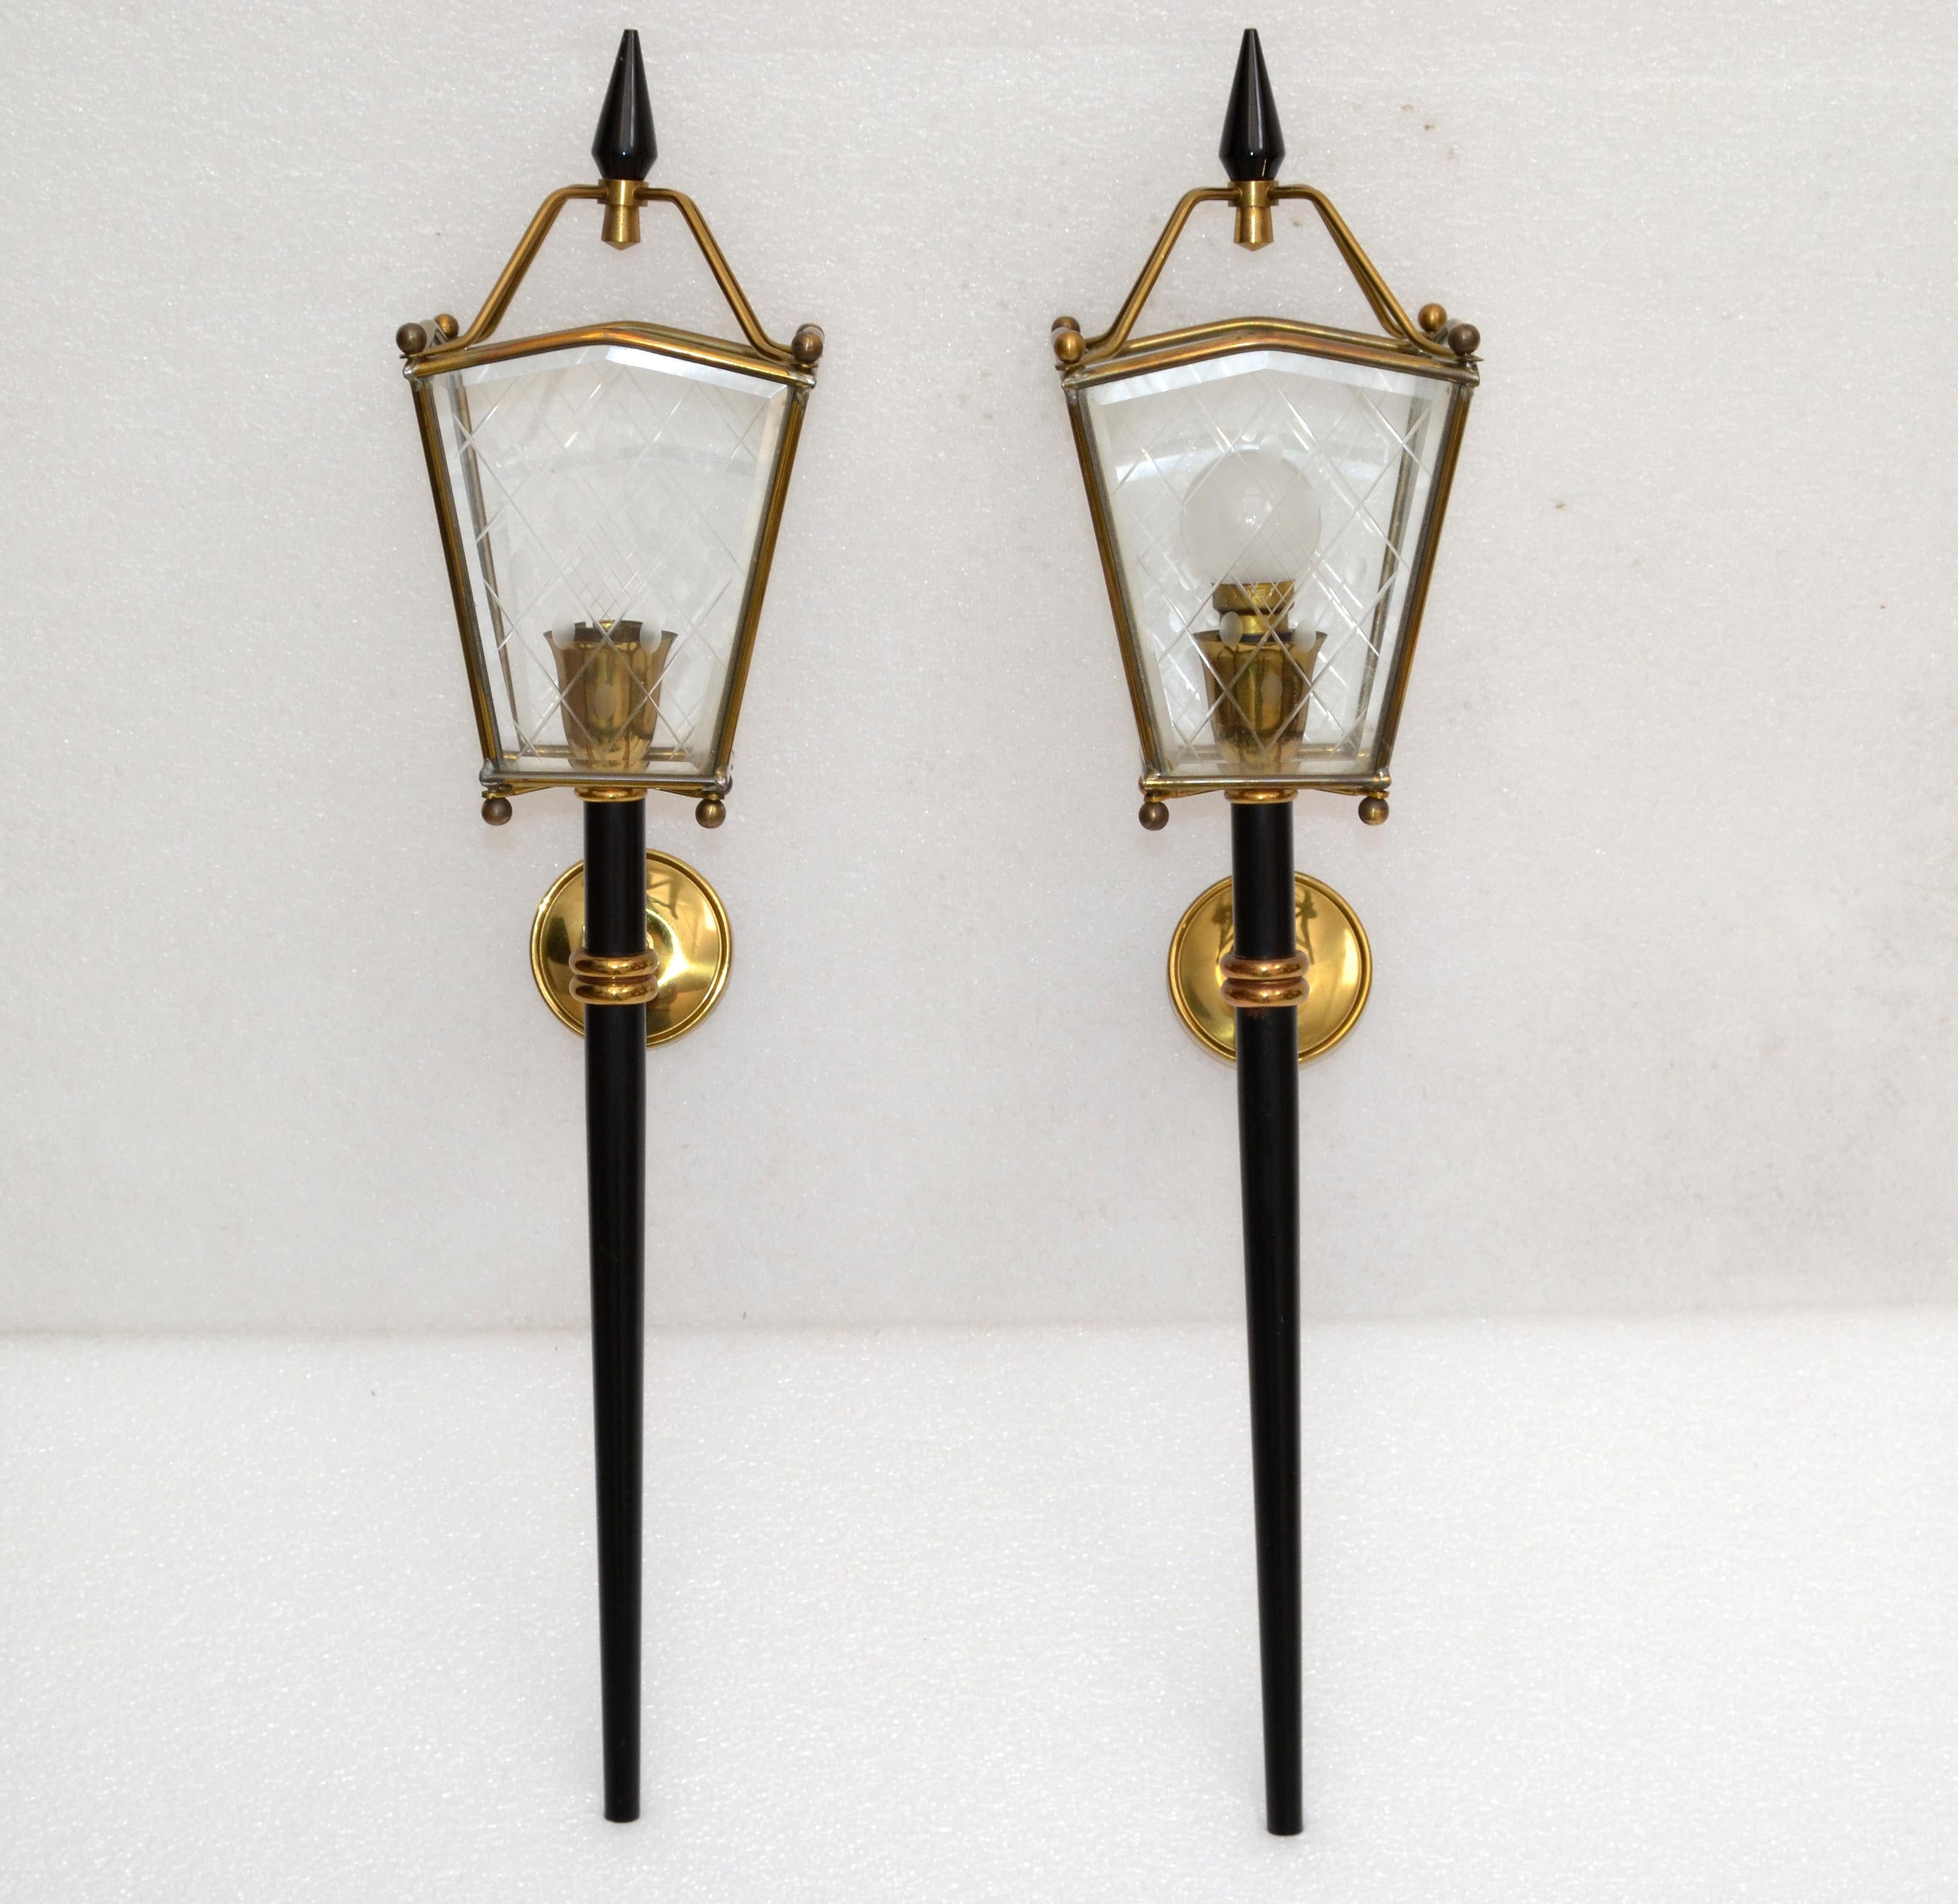 Jacques Adnet Style Sconces Lantern Wall Lamps French Mid-Century Modern, Pair 7